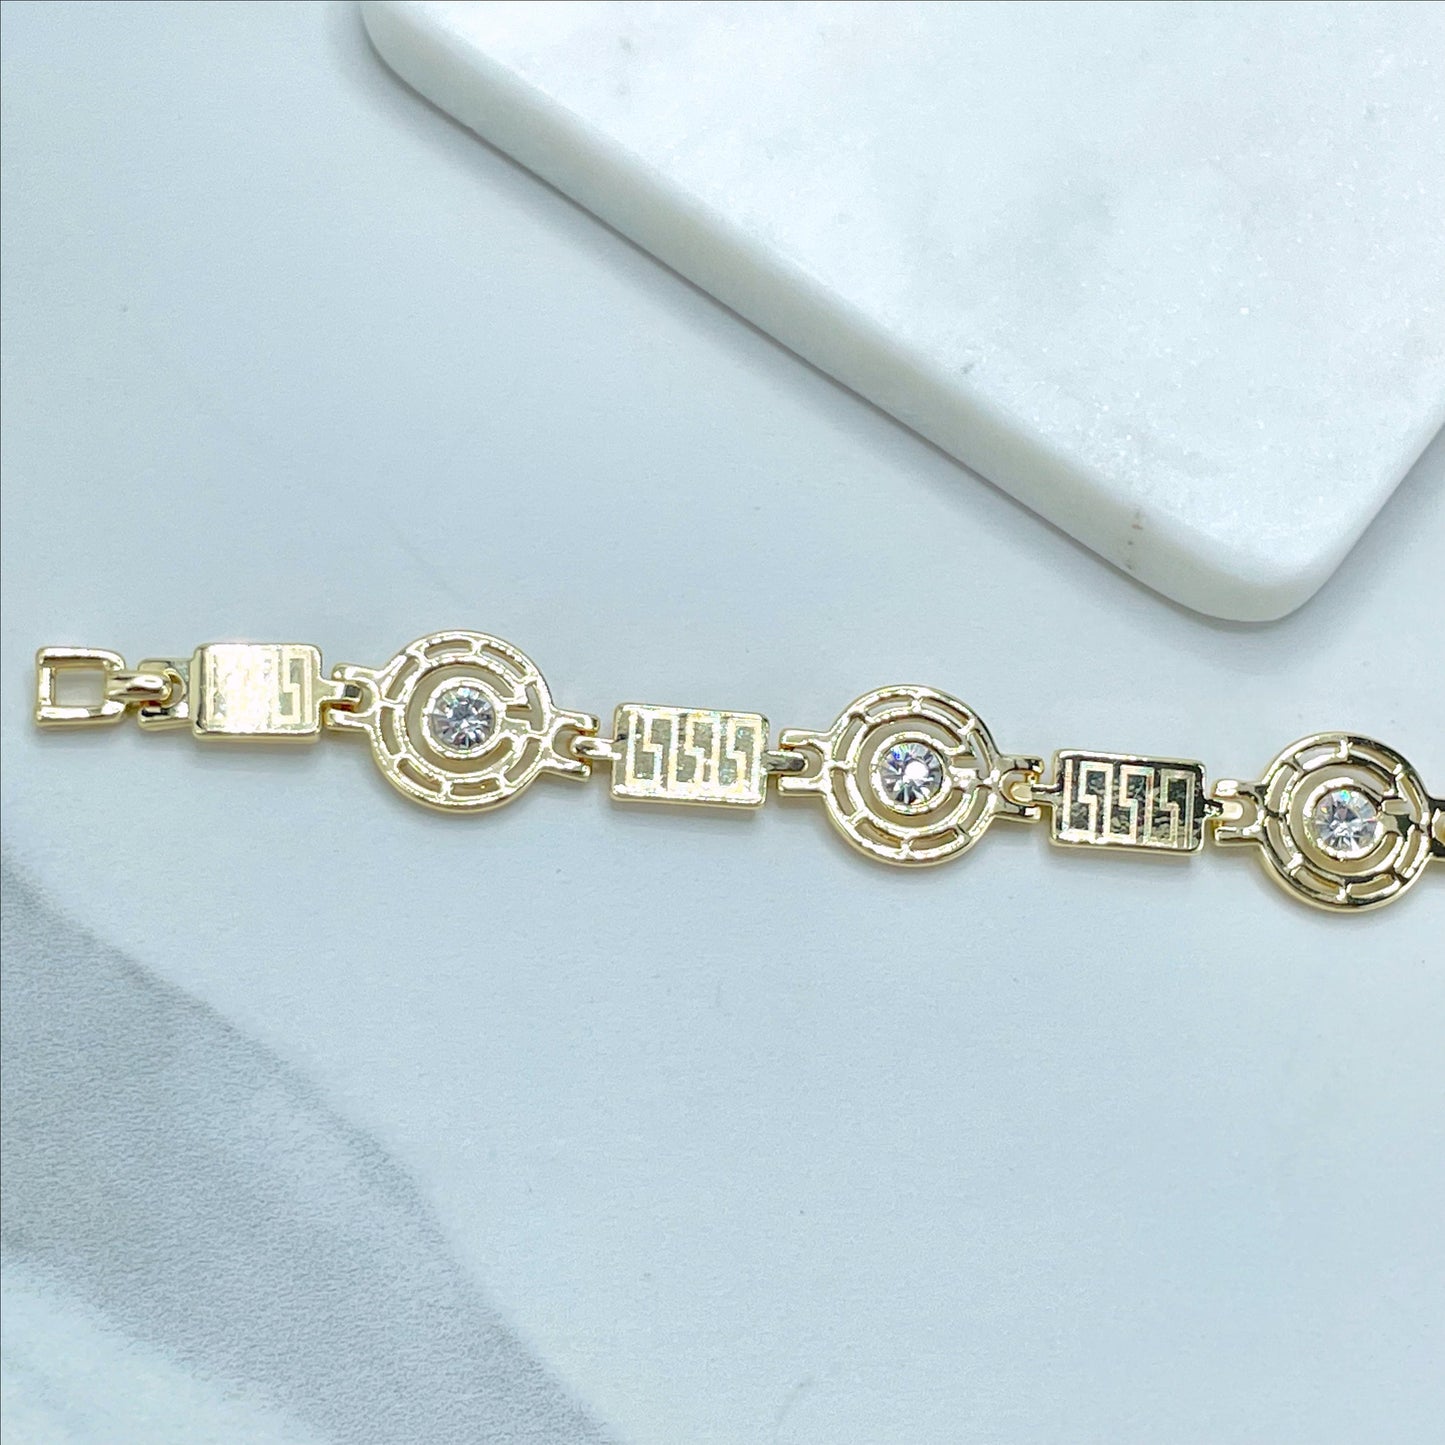 18k Gold Filled Rectangular Patterned Details and Gold Round with Cubic Zirconia, Linked Bracelet, Wholesale Jewelry Making Supplies